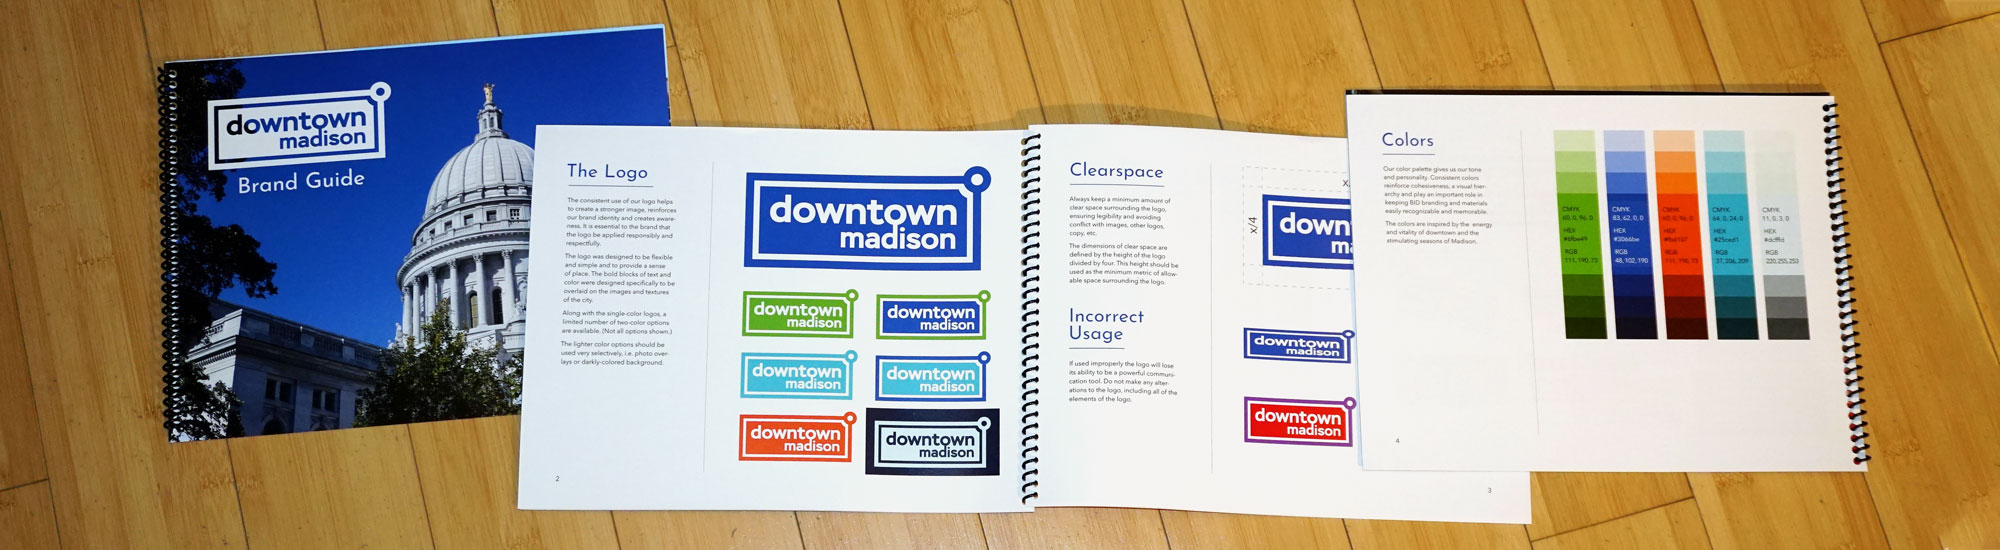 Photo of Madison's Central Business Improvement District brand guide